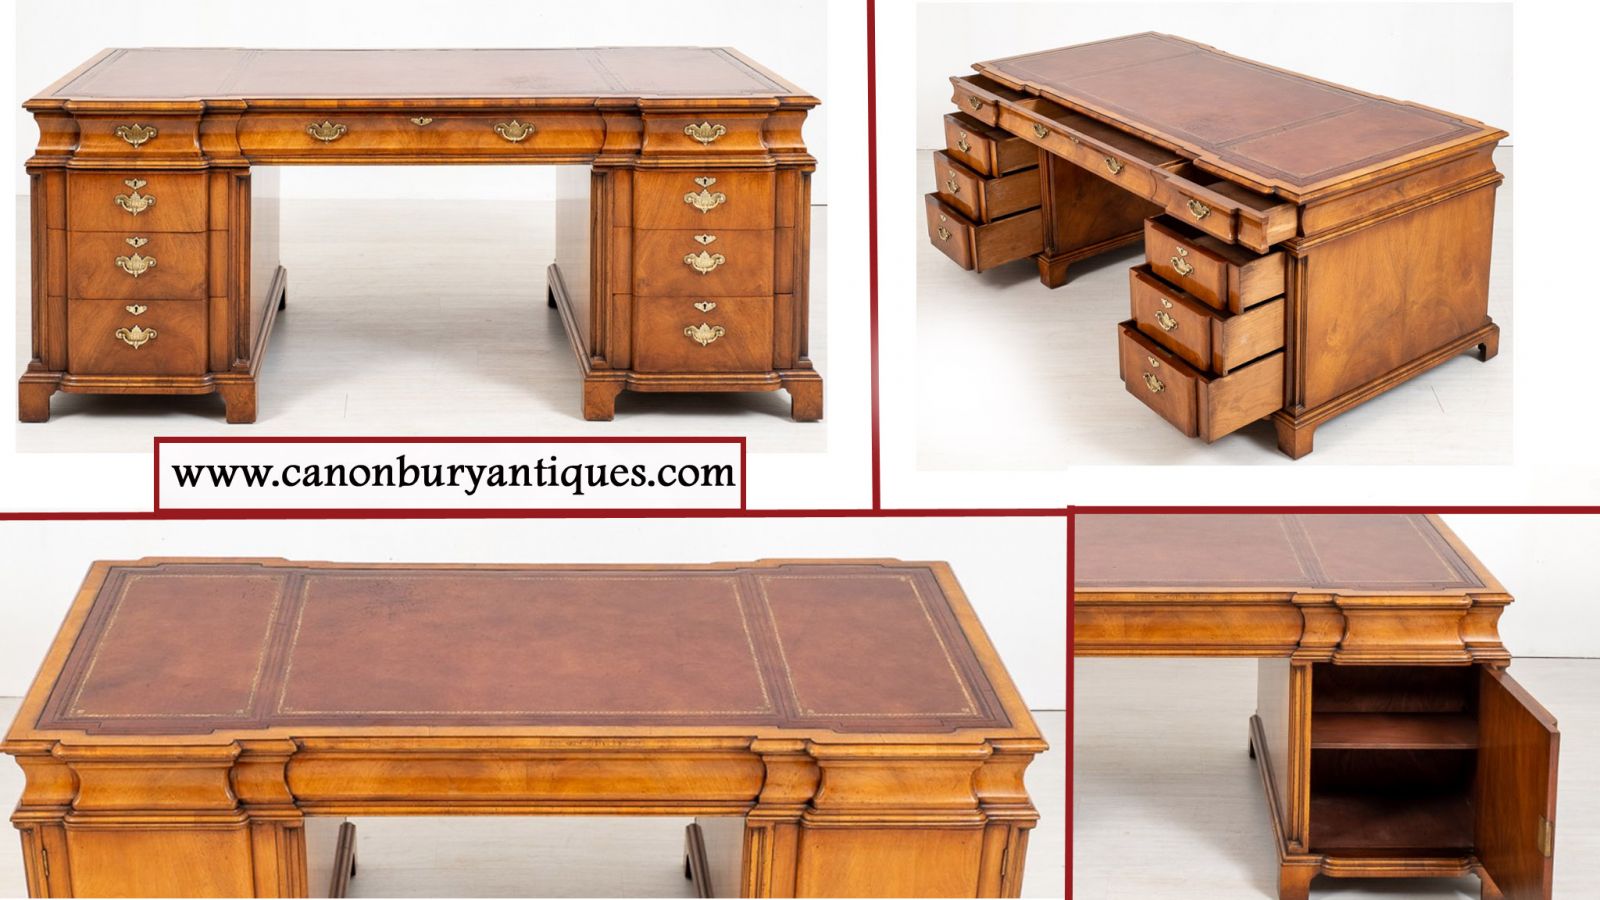 Georgian Antique Desk - exactly what we are looking for in North London